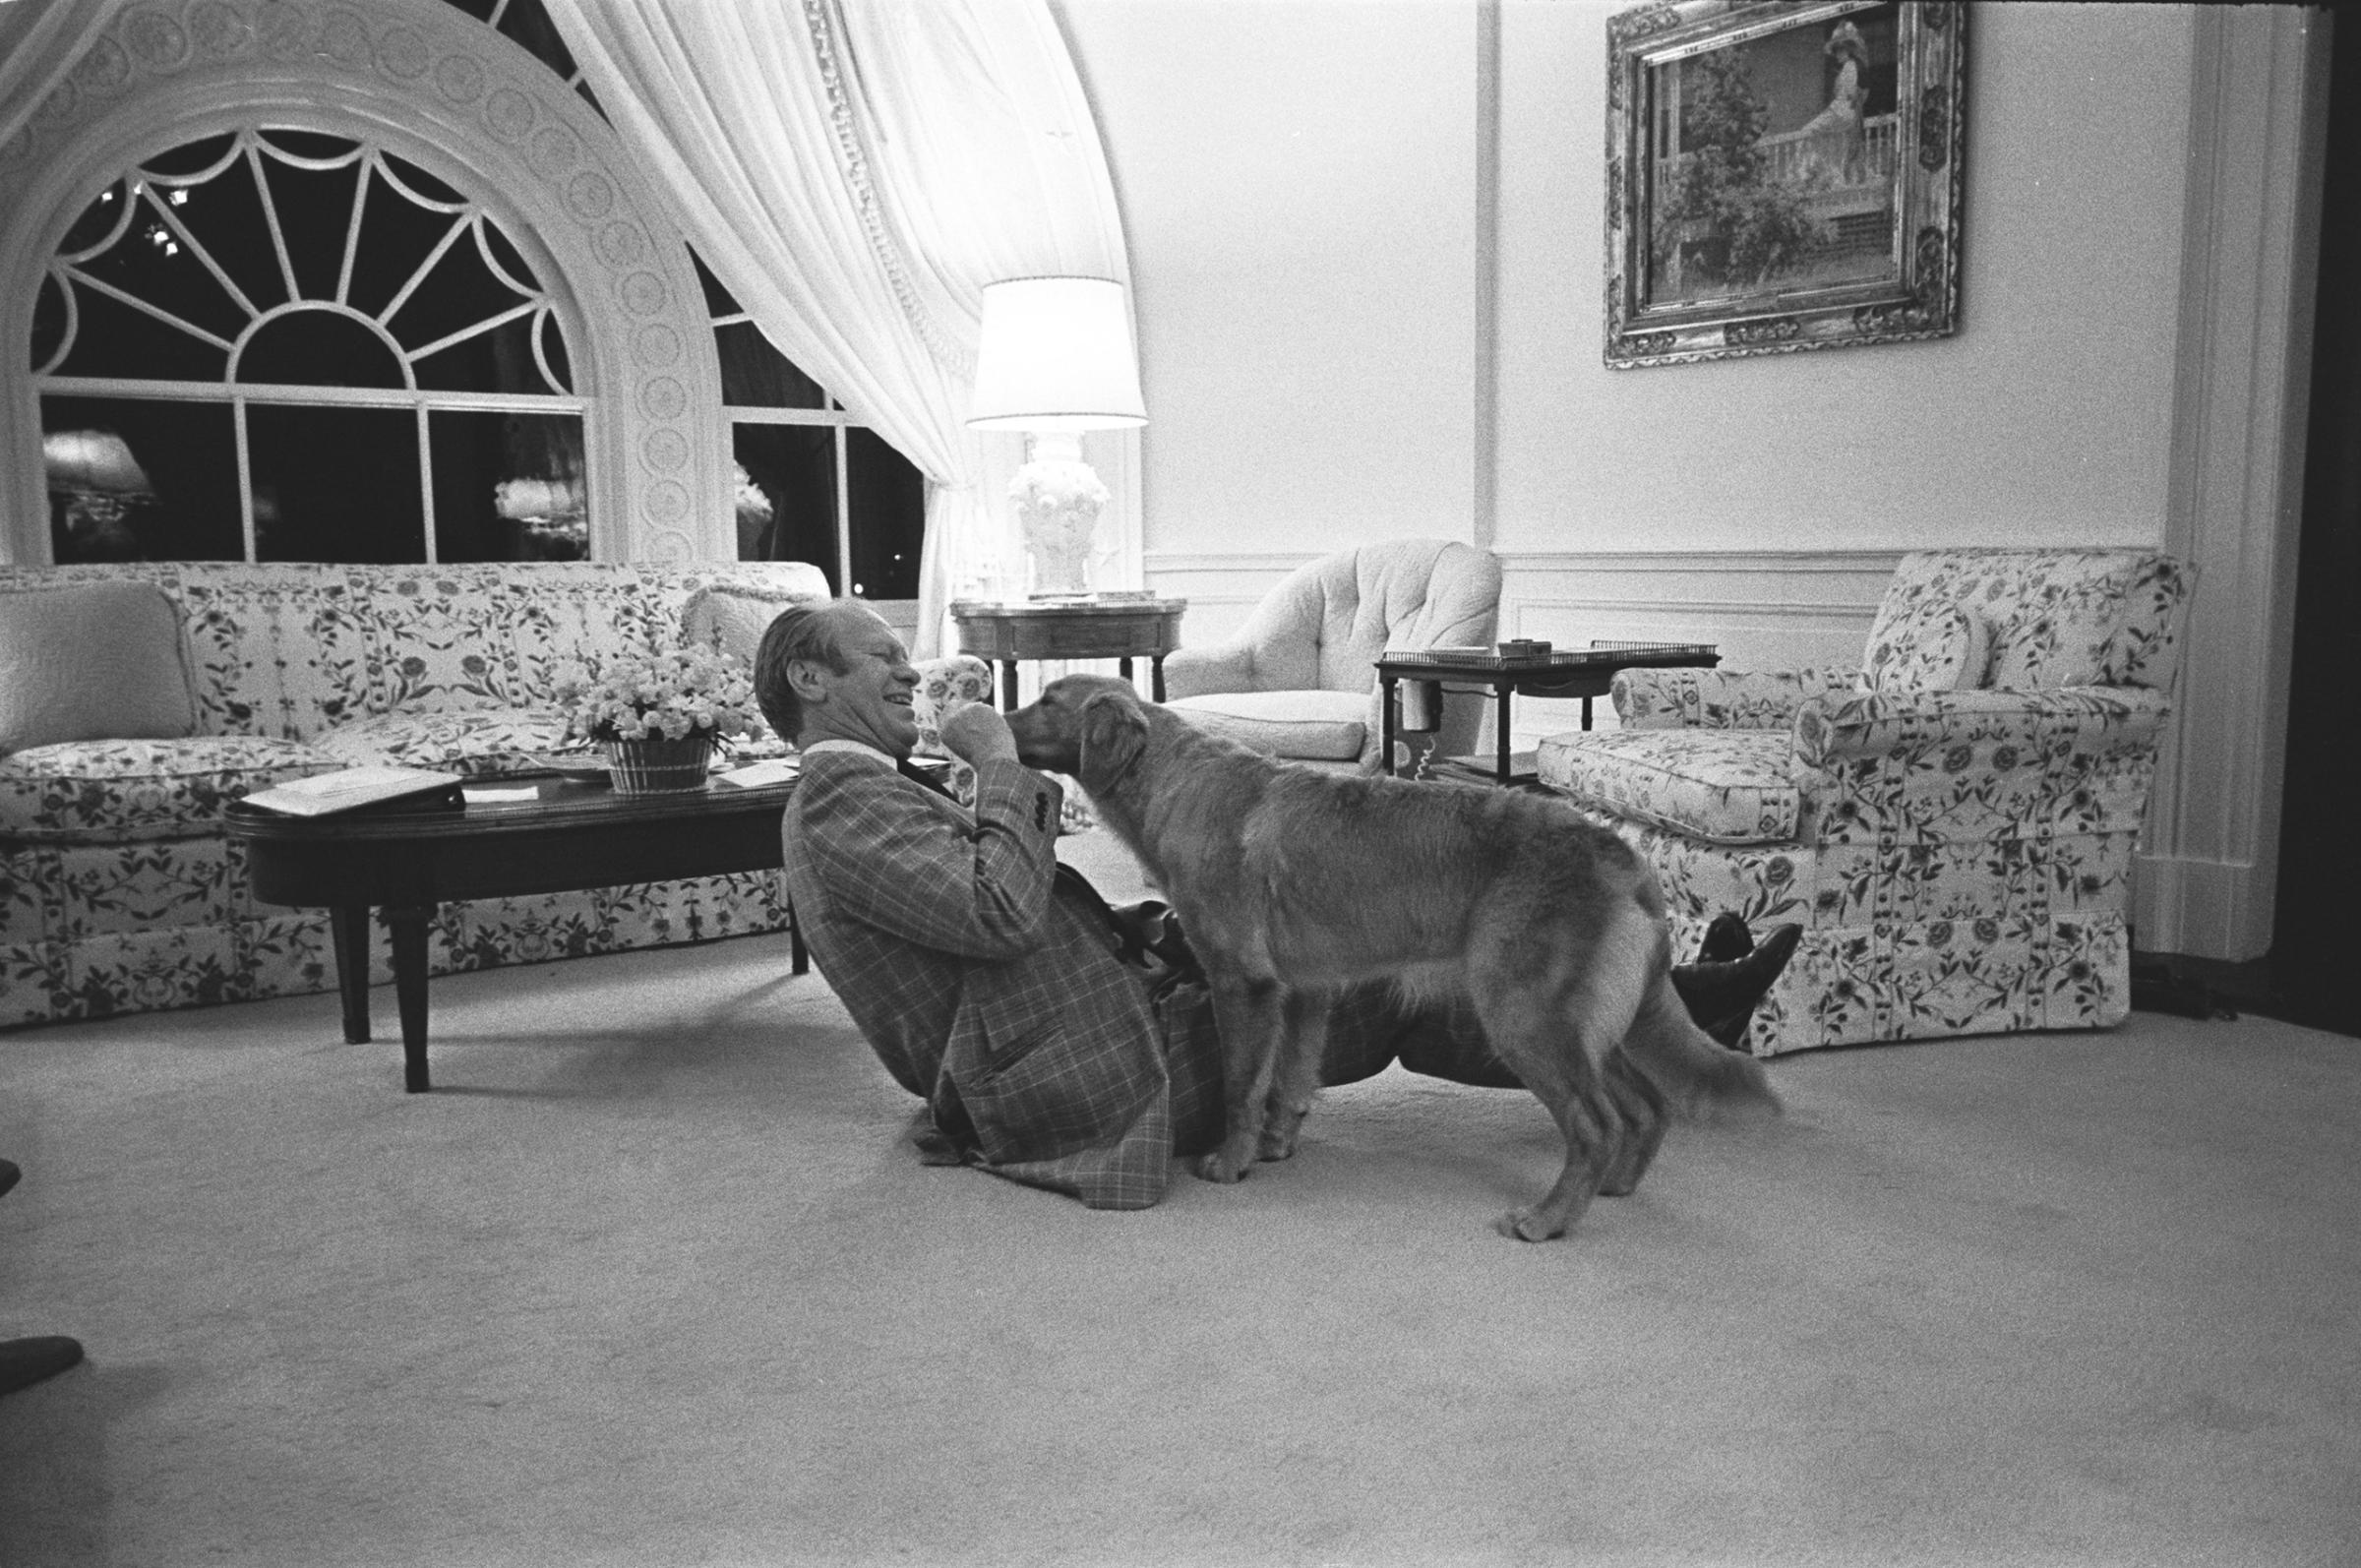 Gerald R. Ford wrestles with his new pet Golden Retriever, which the Fords named Liberty, in the second story family room of the White House Executive Residence on Feb. 2, 1975. Liberty was a gift from Ford's daughter, Susan, and his personal photographer, David Hume Kennerly.